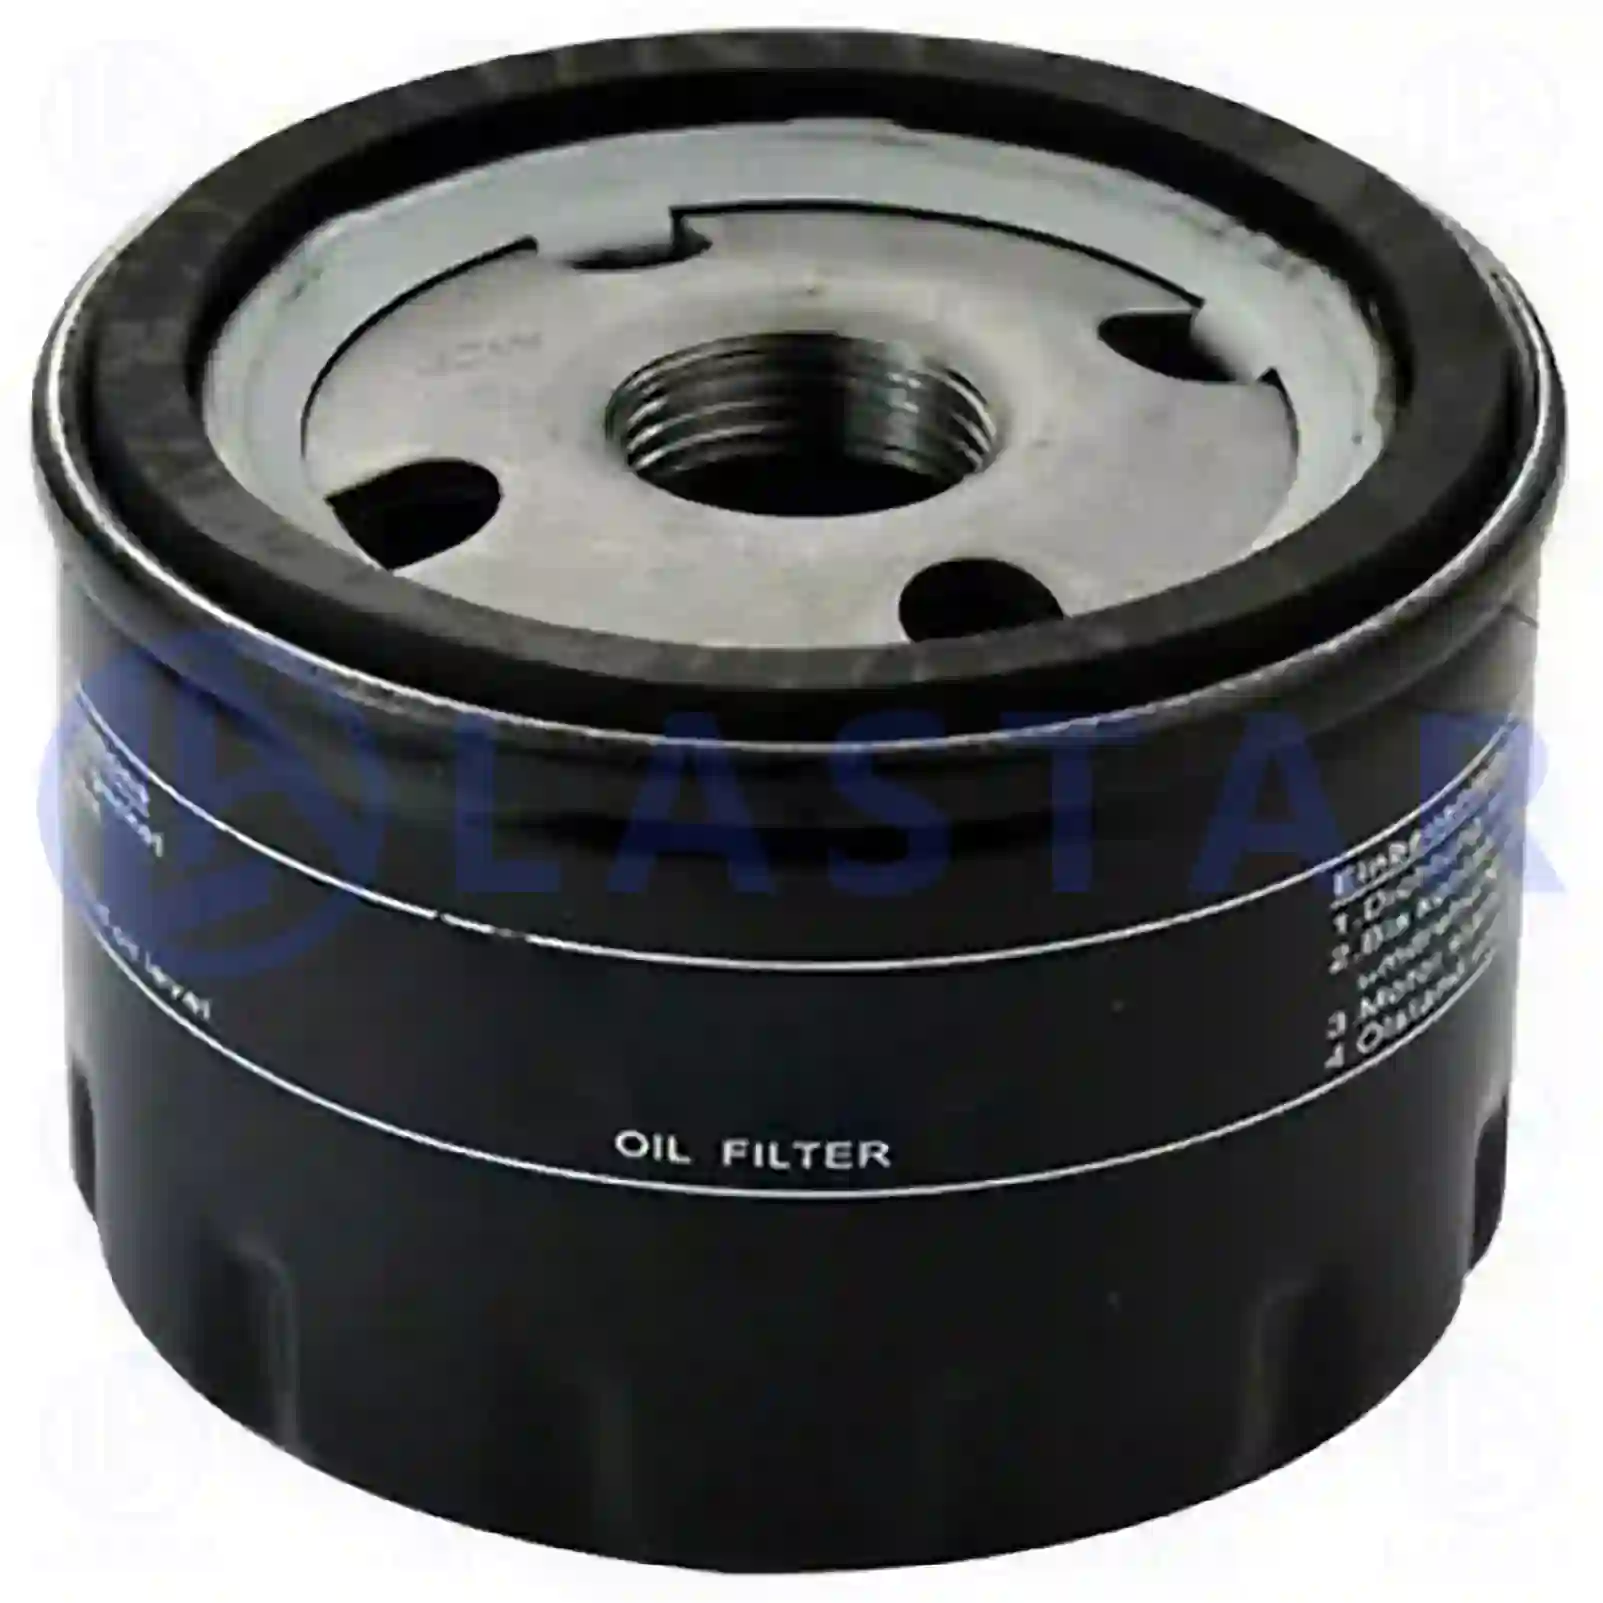 Oil filter, 77700227, 01FBO042, X106, X108, X557, X569, X571, X601, X618, X623, 73500506, 8933004195, 00922715, 6439354, 9111019, 93156290, 93156540, 33004195, 4186267, 8933004195, J0033408, J0871919, KJ0871919, KT0730077, T0730077, 110991, 1109A4, 1109A5, 1109G3, 1109N6, 1109P1, 1109R8, 8200768913, 6001543357, 6001545344, 7700073302, 7700107905, 7700110796, 7700272523, 7700272902, 7700272903, 7700272982, 7700274177, 7700676302, 7700695801, 7700695804, 7700727401, 7700727478, 7700727479, 7700727480, 7700728310, 7700730077, 7700734945, 7700734957, 7700735917, 7700737991, 7700744879, 7700745708, 7700748326, 7700749326, 7700854776, 7700854852, 7700855853, 7700856114, 7700866099, 7700869390, 7700871919, 7700873583, 7700873603, 7701043377, 7701056188, 7701349452, 7701349725, 7701727480, 7702144083, 7708715147, 8200033408, 8200768913, 8200867976, 8671002274, 8671014020, 8671014026, 8933004195, 8983501900, 8983601900, 1052175136, 12850312, 90151400, 71771362, 73500506, 5003227, 5013388, 5013389, 5016714, 5016715, 5016785, 5016956, 5017317, 5017319, 5027151, 25026209, 6439354, 9111019, 93156290, 93156540, 93198598, 94243270, 4243445, 6439354, 9110718, 9111019, 93156290, 93156540, 93156562, 94243270, M38165, OK127, OK83, 3304159, 53002656, 83501901, T0676302, T0730077, T1349452, 7700274177, 107217510700, 107217511706, 73500506, 112397, 0021751070, 107175107, 1072175107, 107217510700, 1072175117, 107217511706, 1072175184, 2175107, 2175117, 2175136, 2175184, AM1514302, 0640066, 4063396, K4862011, M851139, M852065, M883804, 15208-000AB, 15208-00Q0F, 15208-00Q0H, 15208-00Q0J, 15208-00QAB, 15208-00QAC, 15208-9F600, 15208-BN700, 77002-74177, 82000-33408, 82000-33468, 4402718, 4403019, 4449274, 6439354, 110991, 1109A4, 1109A5, 1109G3, 1109N6, 1109P1, 1109R8, 8200768913, 112397L, 113219L, 850284, 6001543357, 6001545344, 7700033408, 7700073302, 7700107905, 7700110796, 7700272523, 7700272902, 7700272903, 7700272982, 7700274177, 7700676302, 7700695801, 7700695804, 7700727401, 7700727478, 7700727479, 7700727480, 7700727482, 7700727487, 7700728148, 7700728310, 7700730077, 7700734945, 7700734957, 7700735917, 7700737991, 7700744879, 7700745708, 7700748326, 7700749326, 7700854776, 7700854852, 7700855853, 7700856099, 7700856114, 7700866099, 7700869029, 7700869390, 7700871919, 7700873583, 7700873603, 7701043377, 7701056188, 7701349452, 7701349720, 7701349725, 7701349752, 7701727480, 7702144083, 7708715147, 8200007832, 8200033408, 8200513035, 8200768913, 8200867976, 8671002648, 8671012211, 8671014020, 8671014026, 8933004195, 8983501900, 8983601900, 16501-84CT0, 16510-84CT0, 16510-84CT0-000, 16510-84CTO, 16510-85CT0, 99000-9900C-309, 99000-990OC-309, 12163-82301, 30887496, 3287999, 3473645 ||  77700227 Lastar Spare Part | Truck Spare Parts, Auotomotive Spare Parts Oil filter, 77700227, 01FBO042, X106, X108, X557, X569, X571, X601, X618, X623, 73500506, 8933004195, 00922715, 6439354, 9111019, 93156290, 93156540, 33004195, 4186267, 8933004195, J0033408, J0871919, KJ0871919, KT0730077, T0730077, 110991, 1109A4, 1109A5, 1109G3, 1109N6, 1109P1, 1109R8, 8200768913, 6001543357, 6001545344, 7700073302, 7700107905, 7700110796, 7700272523, 7700272902, 7700272903, 7700272982, 7700274177, 7700676302, 7700695801, 7700695804, 7700727401, 7700727478, 7700727479, 7700727480, 7700728310, 7700730077, 7700734945, 7700734957, 7700735917, 7700737991, 7700744879, 7700745708, 7700748326, 7700749326, 7700854776, 7700854852, 7700855853, 7700856114, 7700866099, 7700869390, 7700871919, 7700873583, 7700873603, 7701043377, 7701056188, 7701349452, 7701349725, 7701727480, 7702144083, 7708715147, 8200033408, 8200768913, 8200867976, 8671002274, 8671014020, 8671014026, 8933004195, 8983501900, 8983601900, 1052175136, 12850312, 90151400, 71771362, 73500506, 5003227, 5013388, 5013389, 5016714, 5016715, 5016785, 5016956, 5017317, 5017319, 5027151, 25026209, 6439354, 9111019, 93156290, 93156540, 93198598, 94243270, 4243445, 6439354, 9110718, 9111019, 93156290, 93156540, 93156562, 94243270, M38165, OK127, OK83, 3304159, 53002656, 83501901, T0676302, T0730077, T1349452, 7700274177, 107217510700, 107217511706, 73500506, 112397, 0021751070, 107175107, 1072175107, 107217510700, 1072175117, 107217511706, 1072175184, 2175107, 2175117, 2175136, 2175184, AM1514302, 0640066, 4063396, K4862011, M851139, M852065, M883804, 15208-000AB, 15208-00Q0F, 15208-00Q0H, 15208-00Q0J, 15208-00QAB, 15208-00QAC, 15208-9F600, 15208-BN700, 77002-74177, 82000-33408, 82000-33468, 4402718, 4403019, 4449274, 6439354, 110991, 1109A4, 1109A5, 1109G3, 1109N6, 1109P1, 1109R8, 8200768913, 112397L, 113219L, 850284, 6001543357, 6001545344, 7700033408, 7700073302, 7700107905, 7700110796, 7700272523, 7700272902, 7700272903, 7700272982, 7700274177, 7700676302, 7700695801, 7700695804, 7700727401, 7700727478, 7700727479, 7700727480, 7700727482, 7700727487, 7700728148, 7700728310, 7700730077, 7700734945, 7700734957, 7700735917, 7700737991, 7700744879, 7700745708, 7700748326, 7700749326, 7700854776, 7700854852, 7700855853, 7700856099, 7700856114, 7700866099, 7700869029, 7700869390, 7700871919, 7700873583, 7700873603, 7701043377, 7701056188, 7701349452, 7701349720, 7701349725, 7701349752, 7701727480, 7702144083, 7708715147, 8200007832, 8200033408, 8200513035, 8200768913, 8200867976, 8671002648, 8671012211, 8671014020, 8671014026, 8933004195, 8983501900, 8983601900, 16501-84CT0, 16510-84CT0, 16510-84CT0-000, 16510-84CTO, 16510-85CT0, 99000-9900C-309, 99000-990OC-309, 12163-82301, 30887496, 3287999, 3473645 ||  77700227 Lastar Spare Part | Truck Spare Parts, Auotomotive Spare Parts